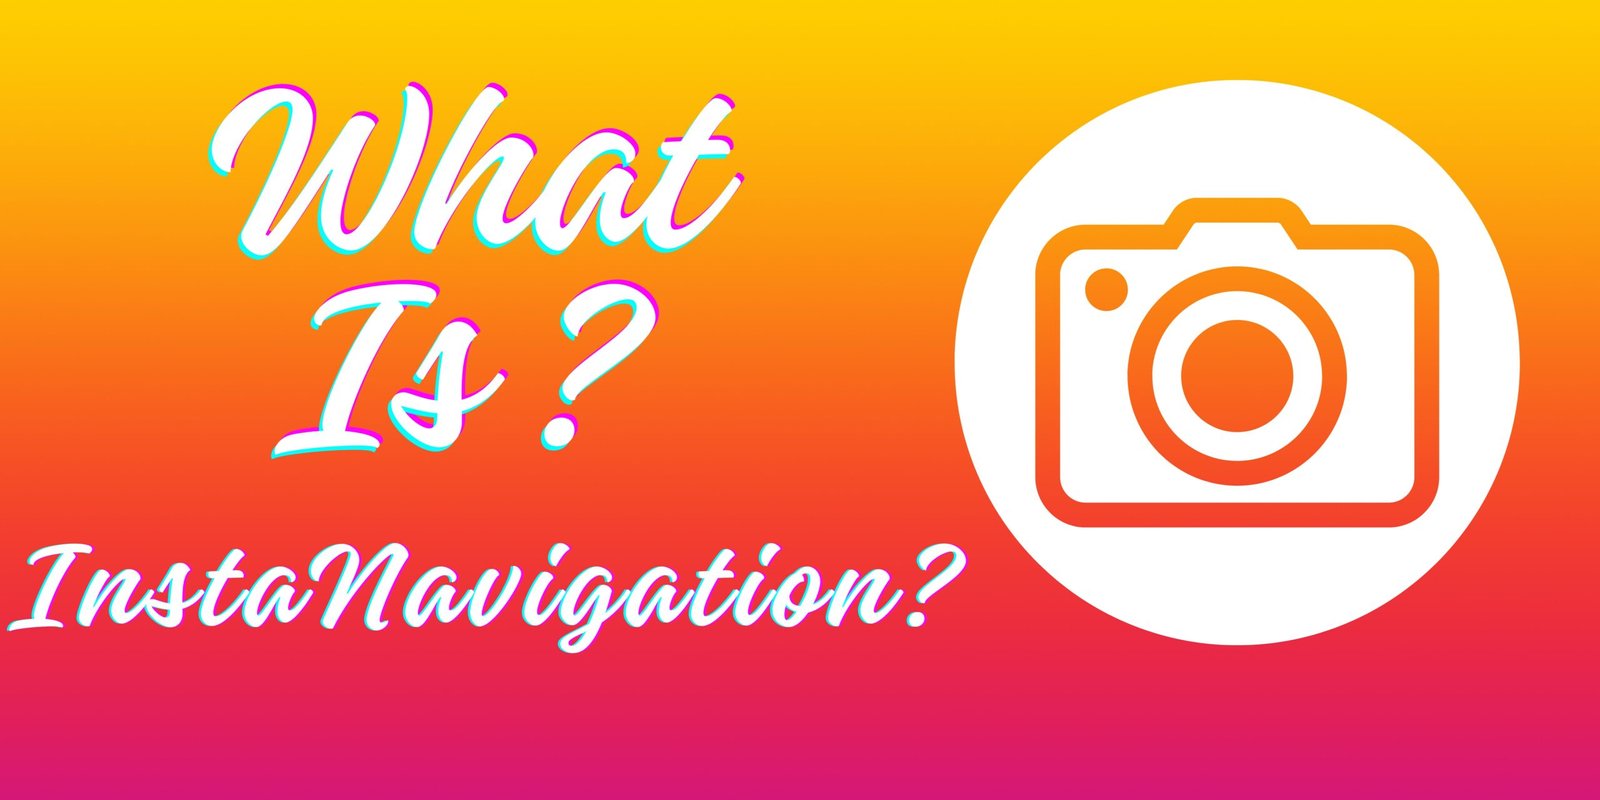 InstaNavigation: Exploring How to Browse Instagram Without an Account